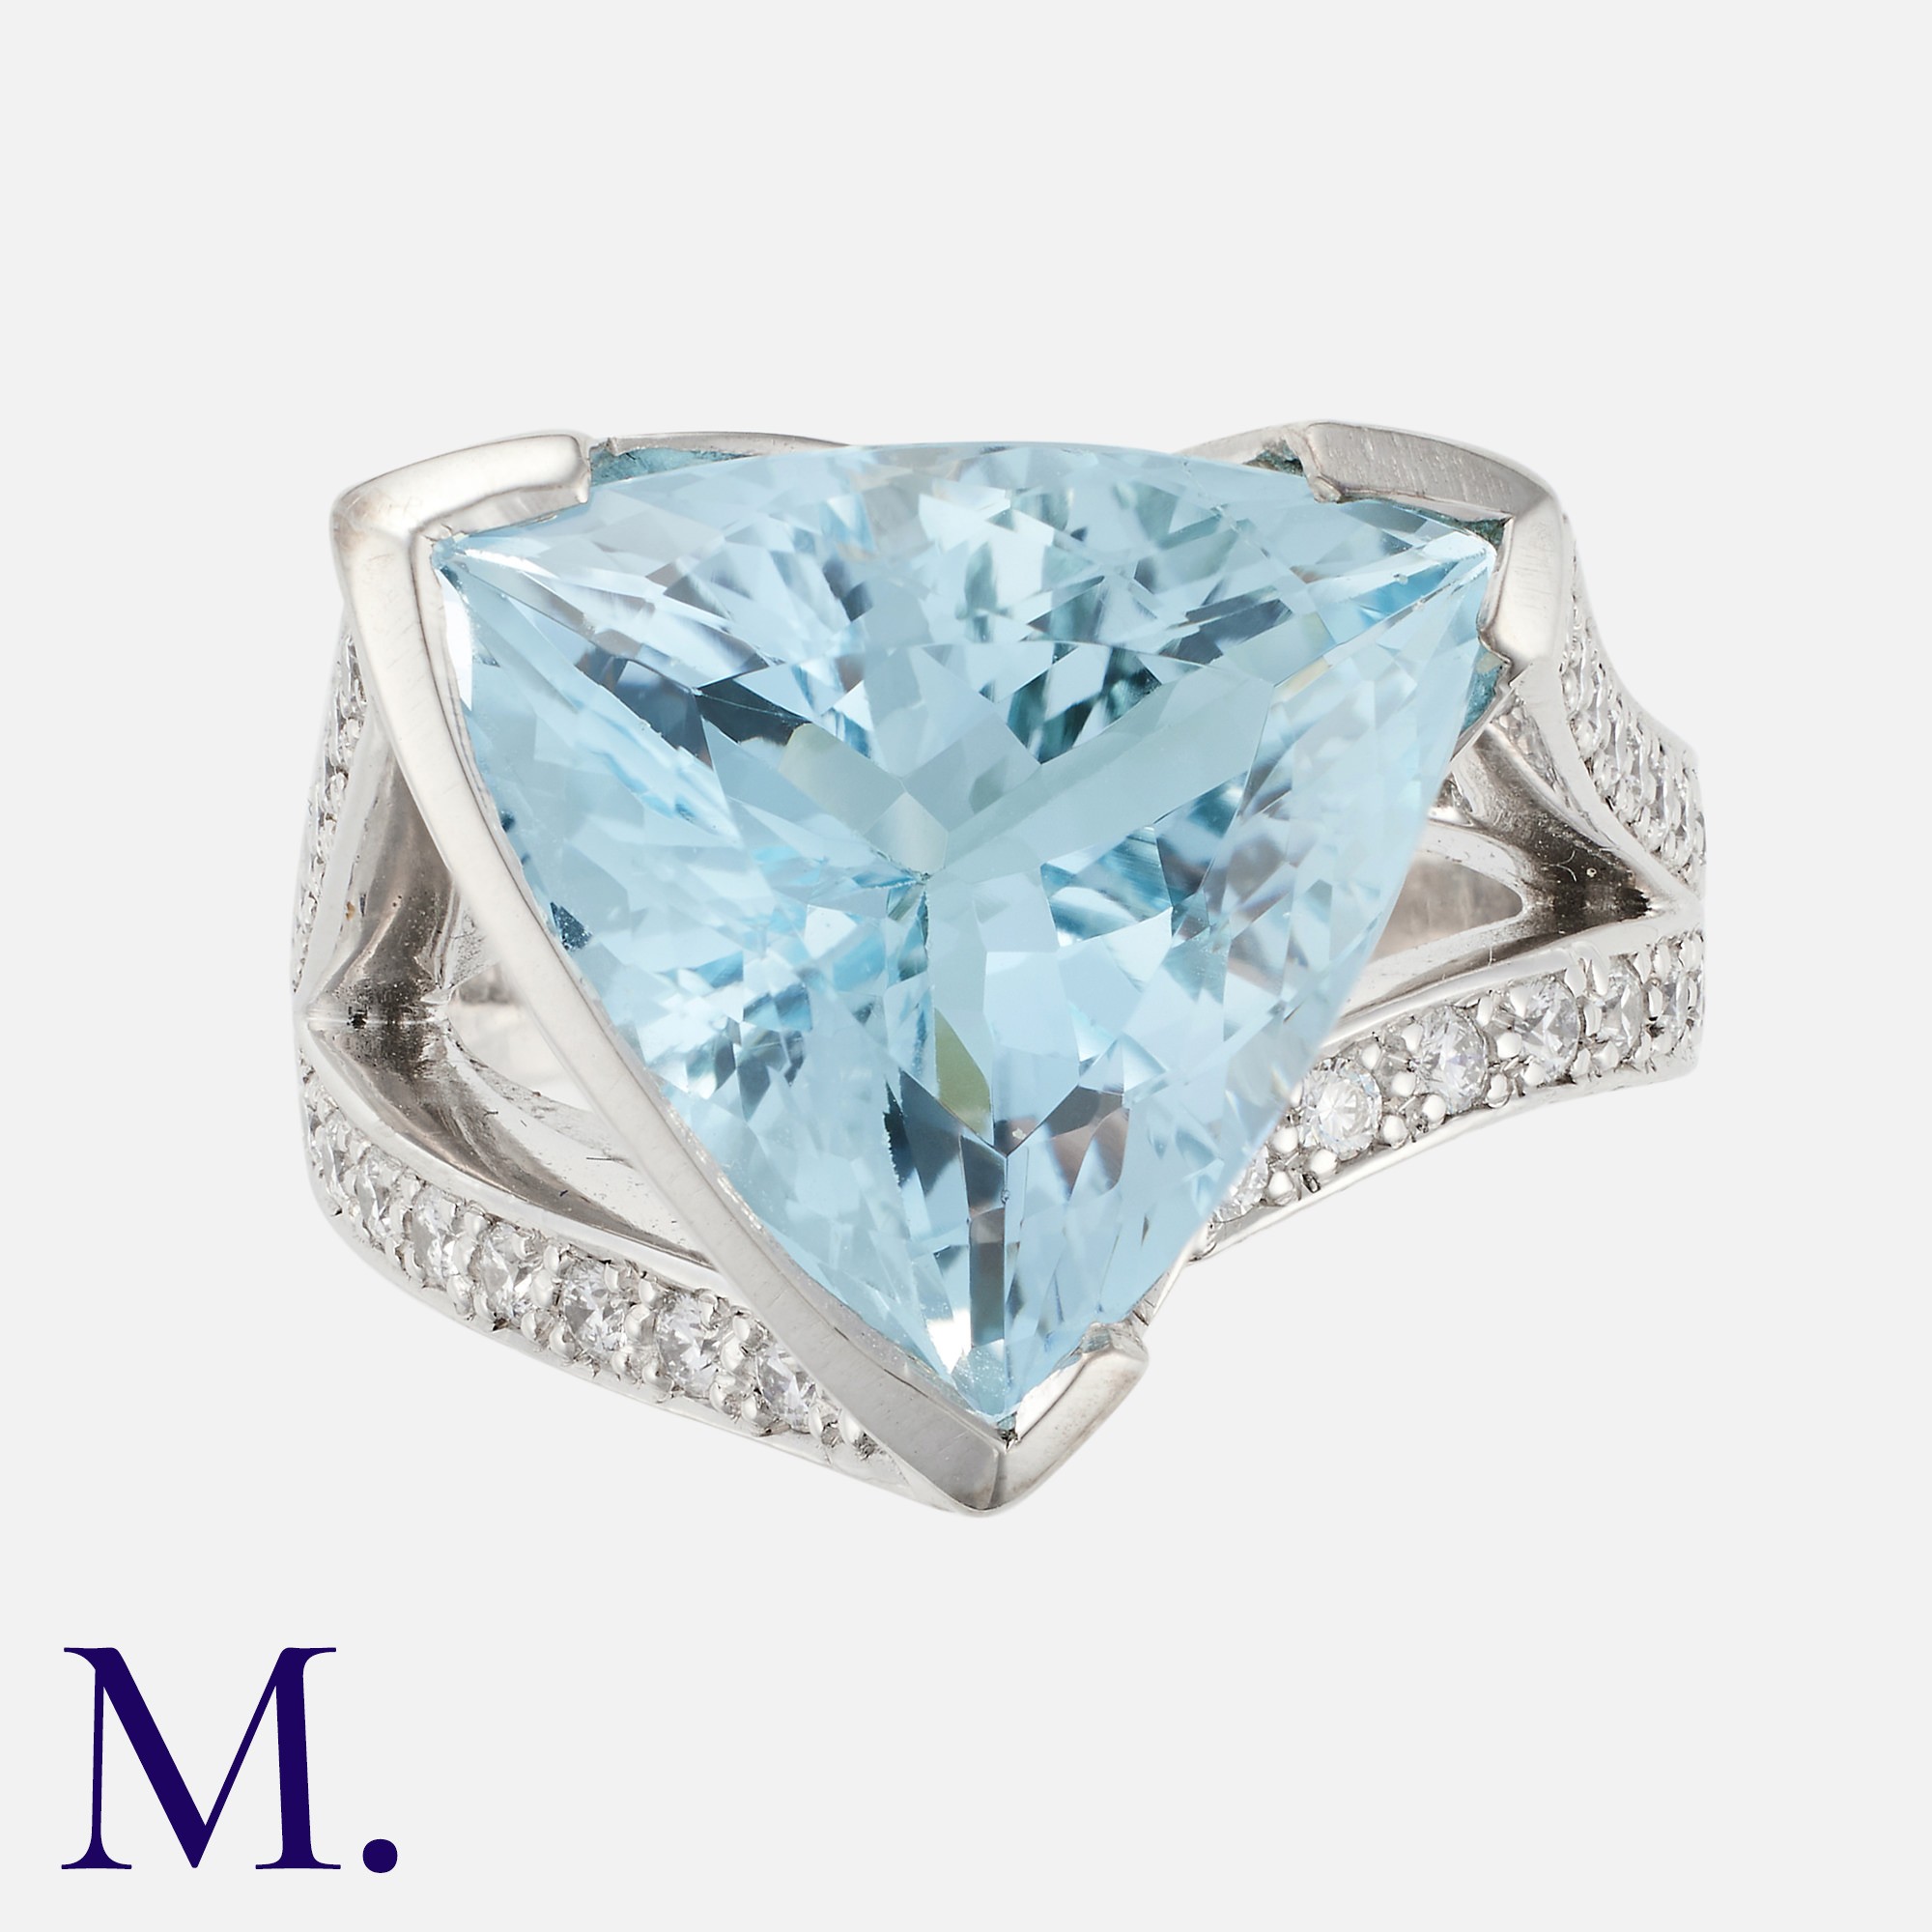 BOODLES. An Aquamarine & Diamond Dress Ring in 18k white gold, set with a large triangular cut